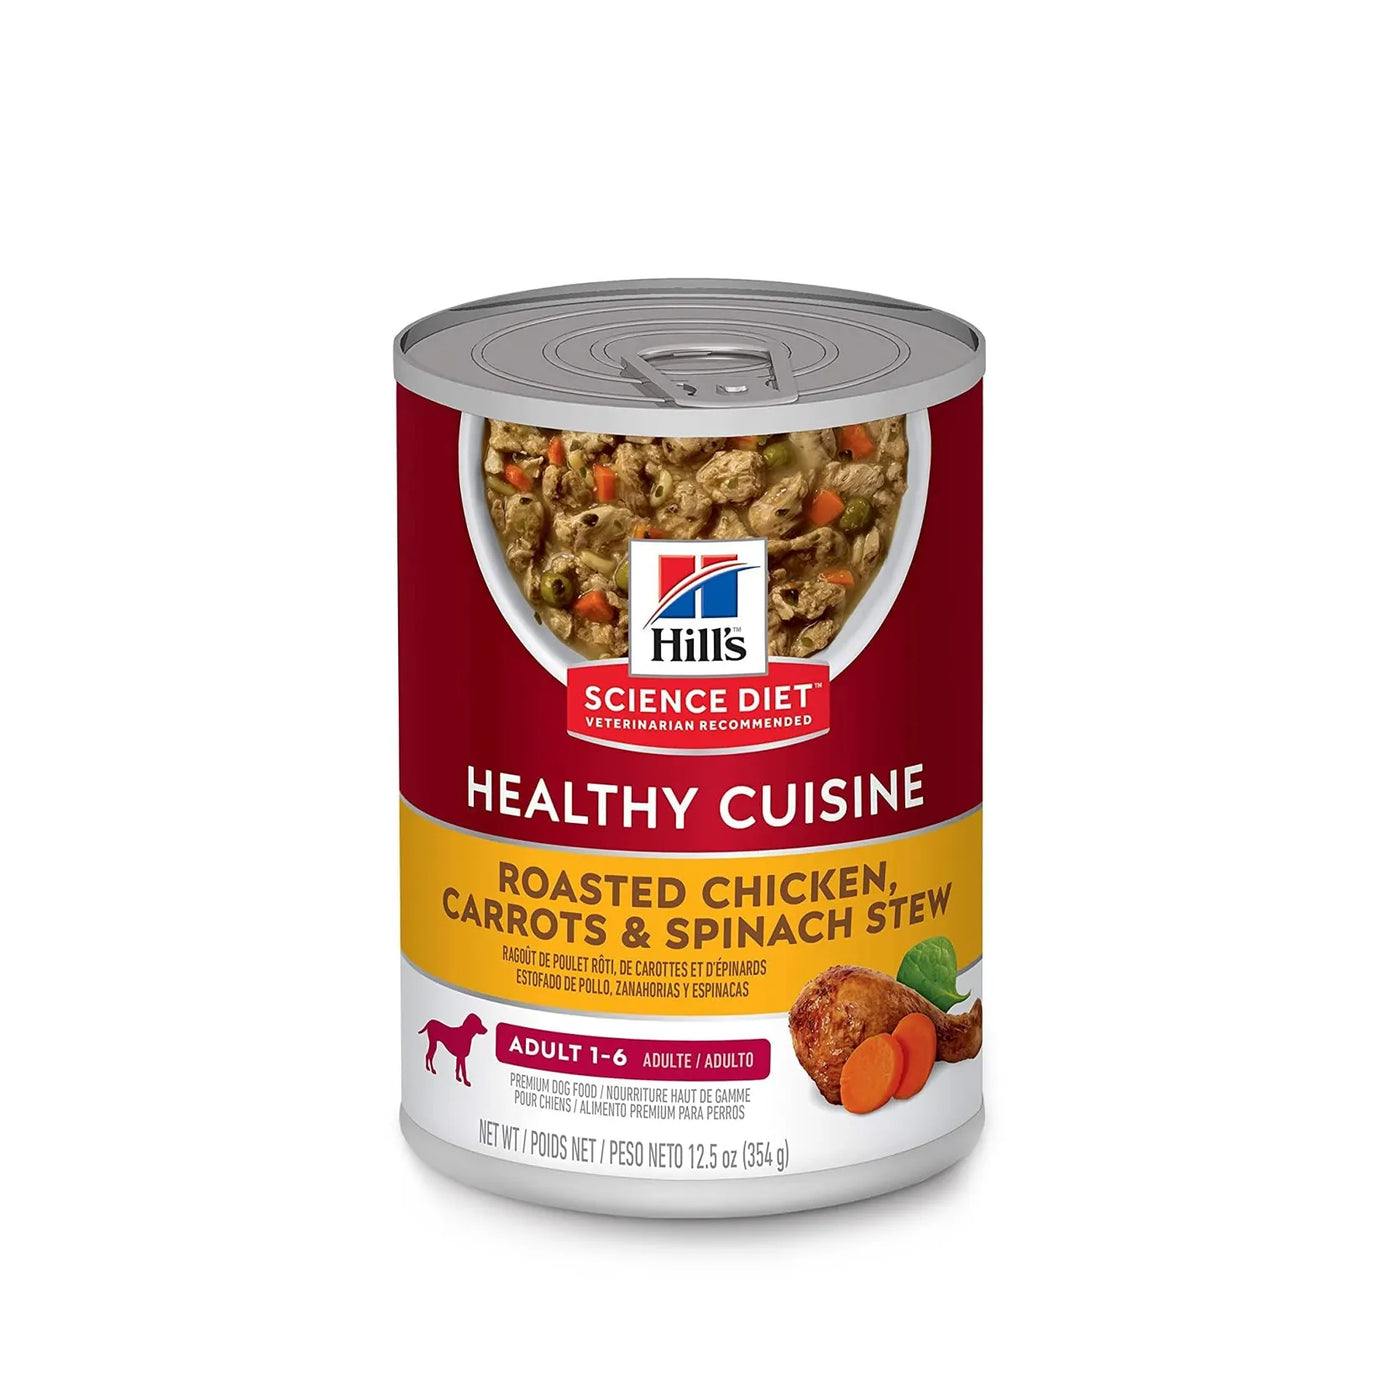 Hills Science Diet - Canine Adult Healthy Cuisine Roasted Chicken, Carrots & Spinach Stew 12.5oz